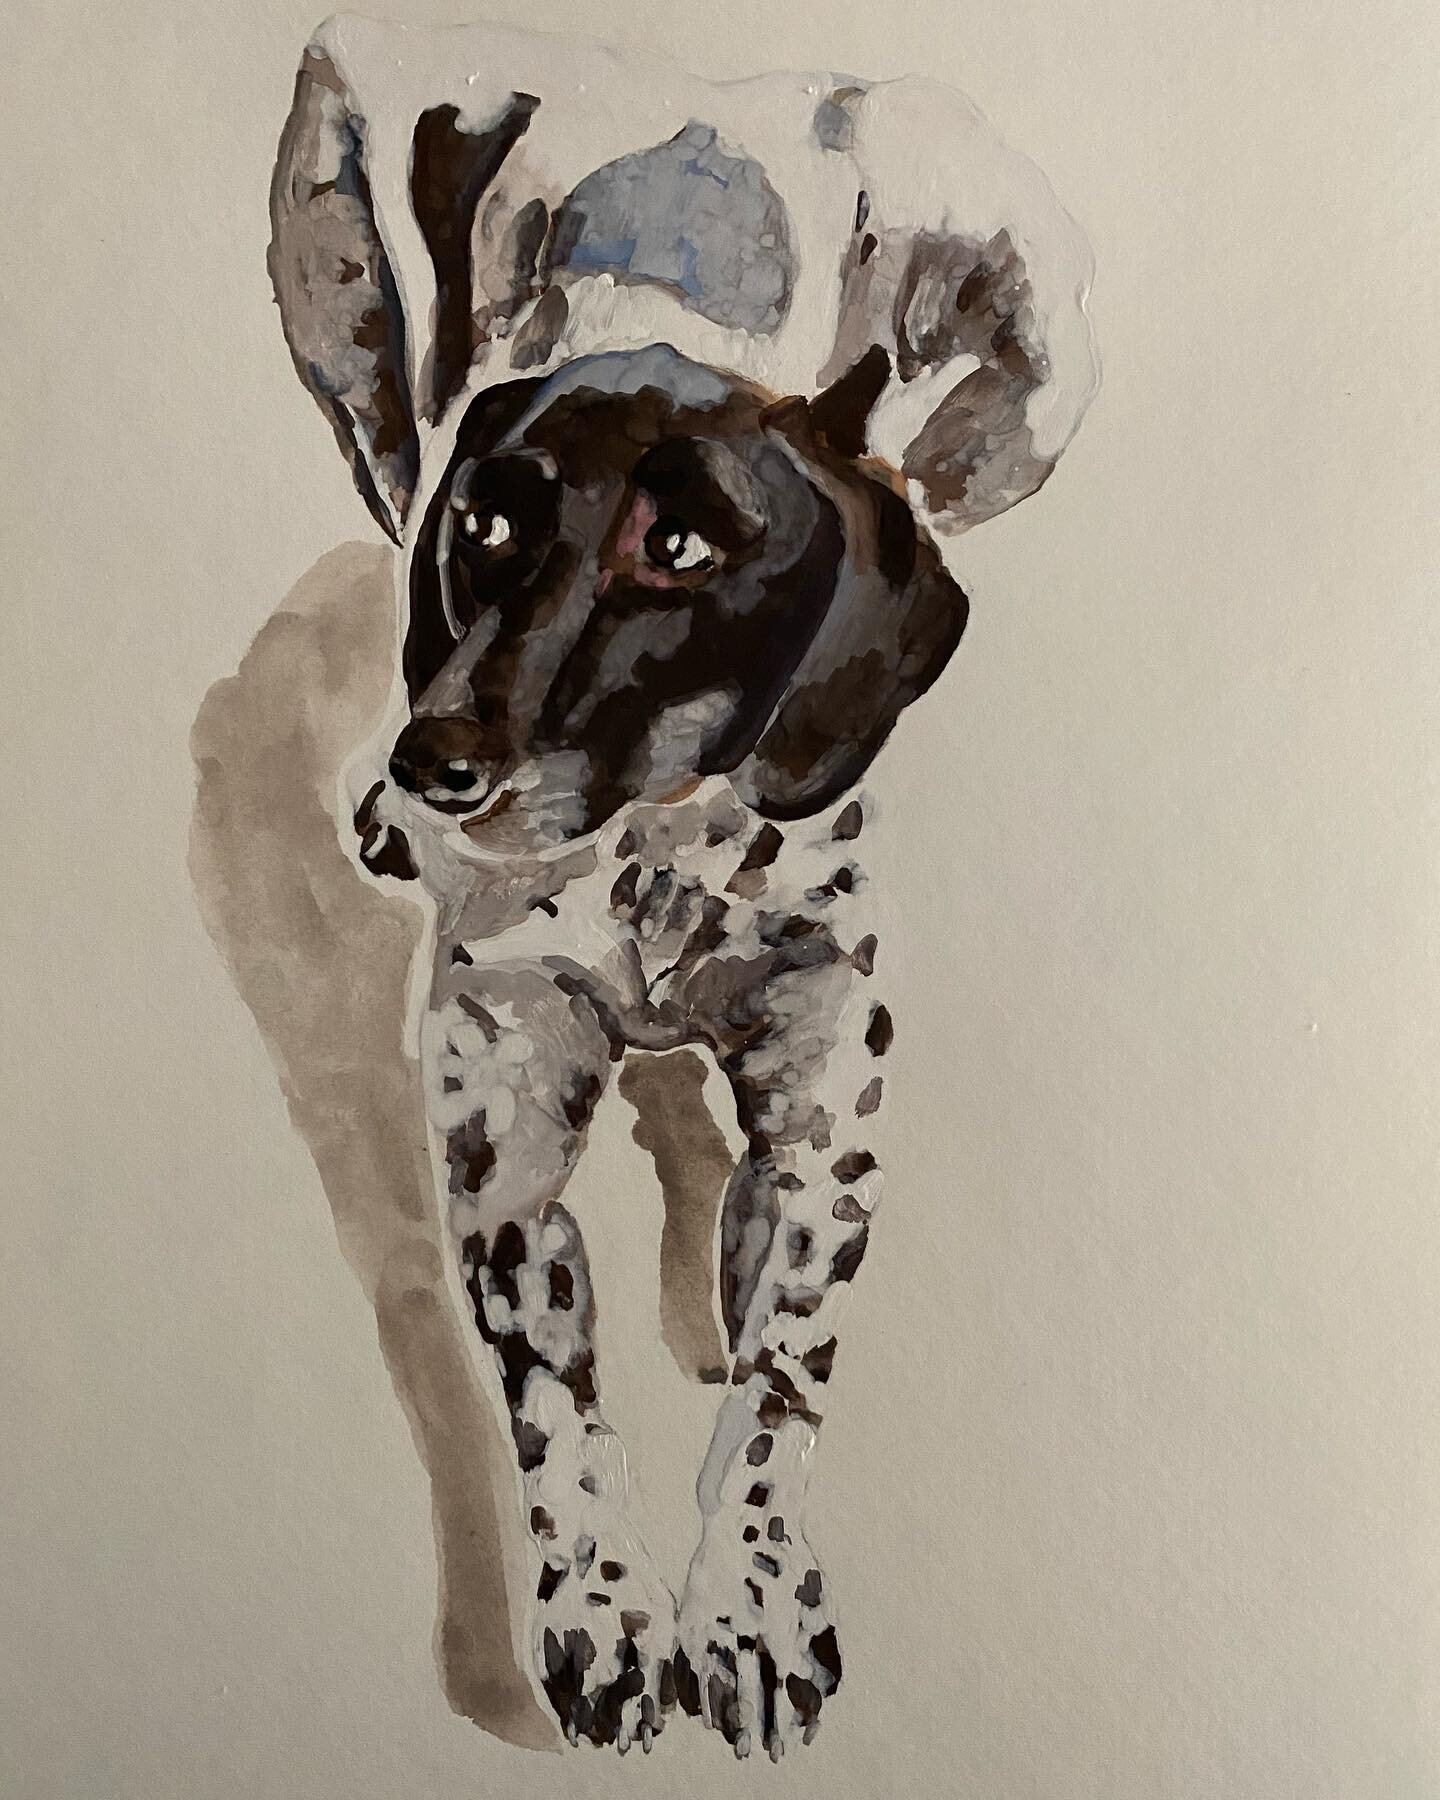 Rocket
Watercolor 9x12

You can commission a portrait just like this one for $60, only until the end of February